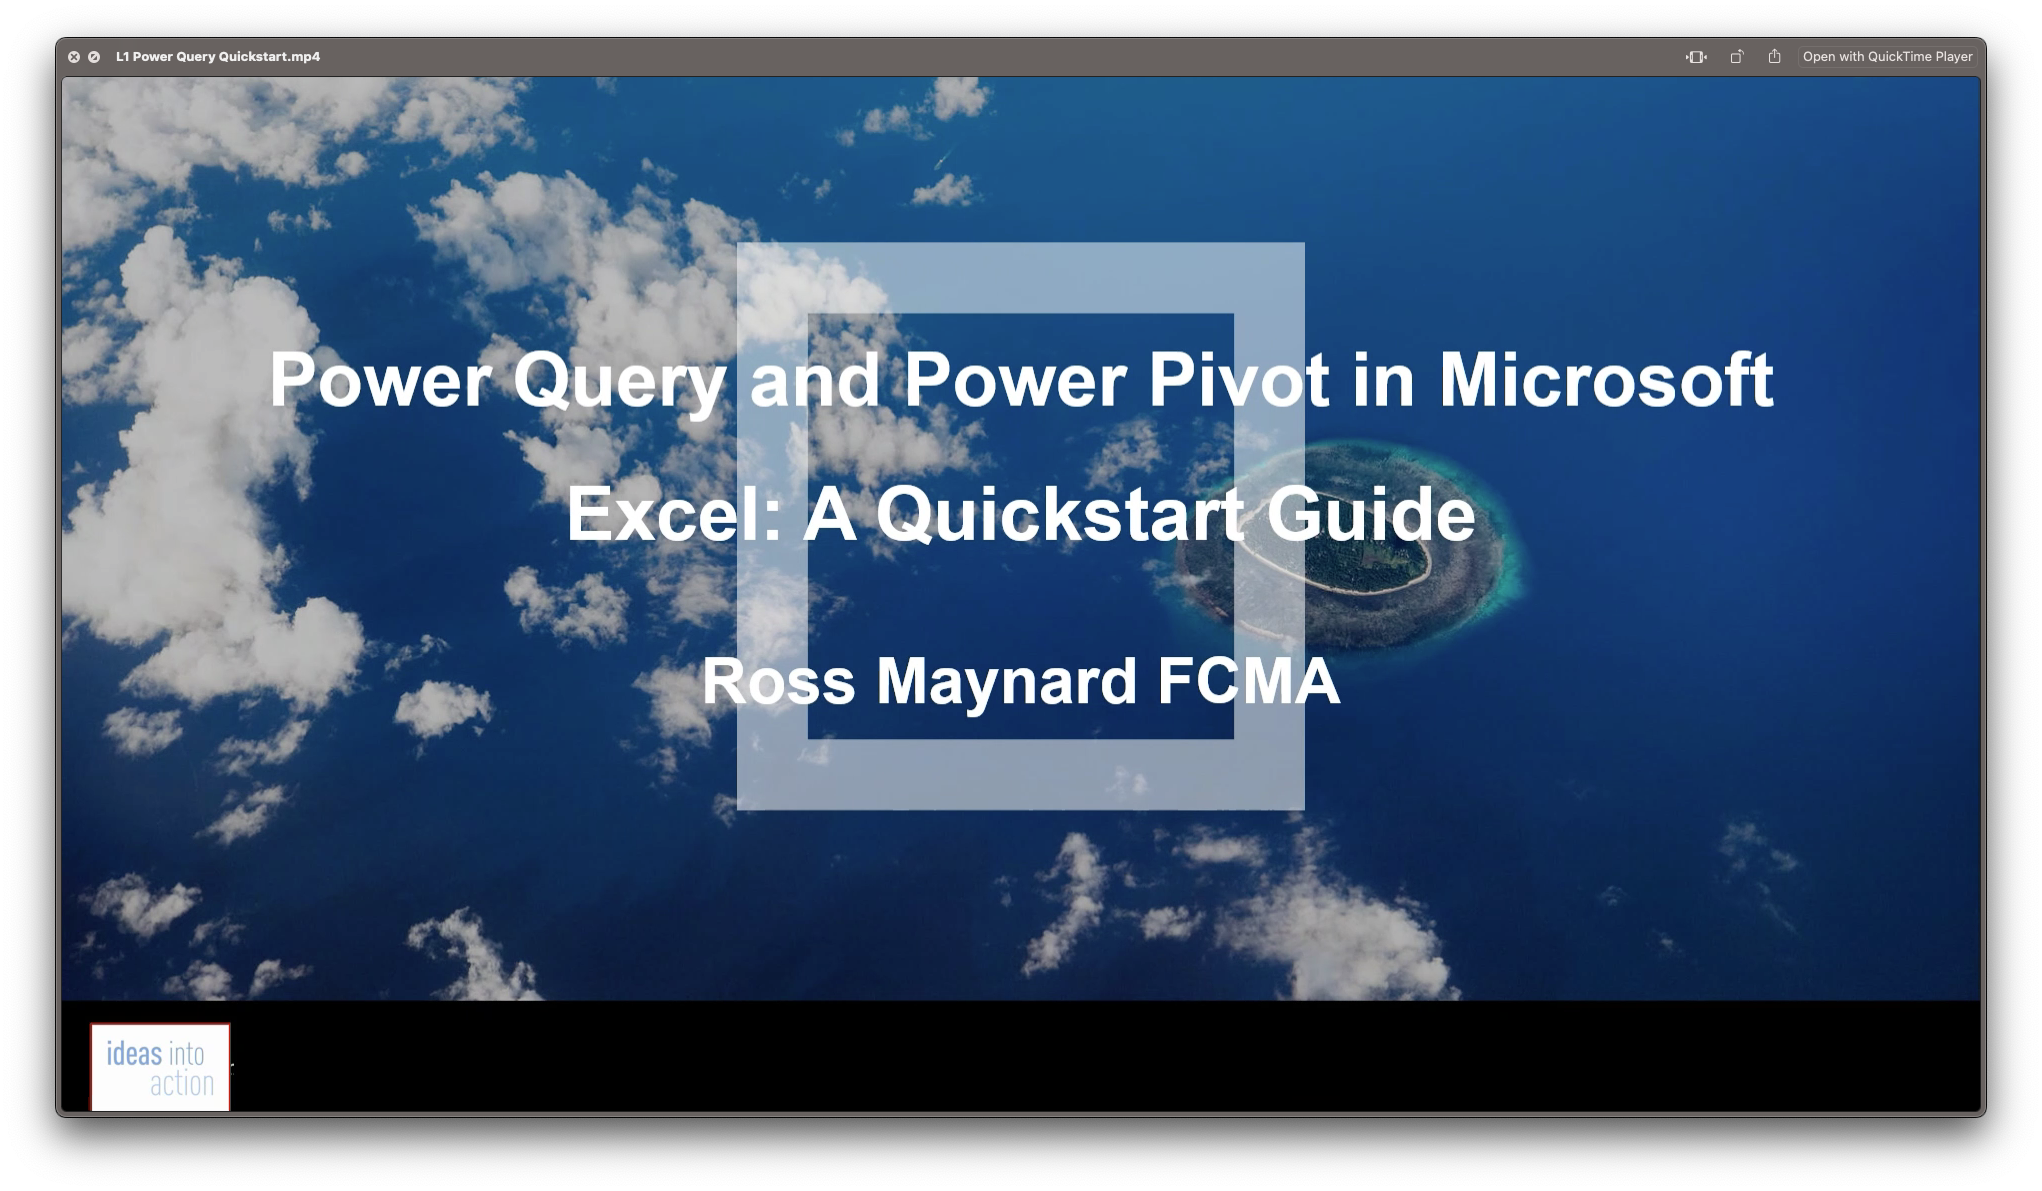 Power Query and Power Pivot in Microsoft Excel: 
A Quickstart Guide
